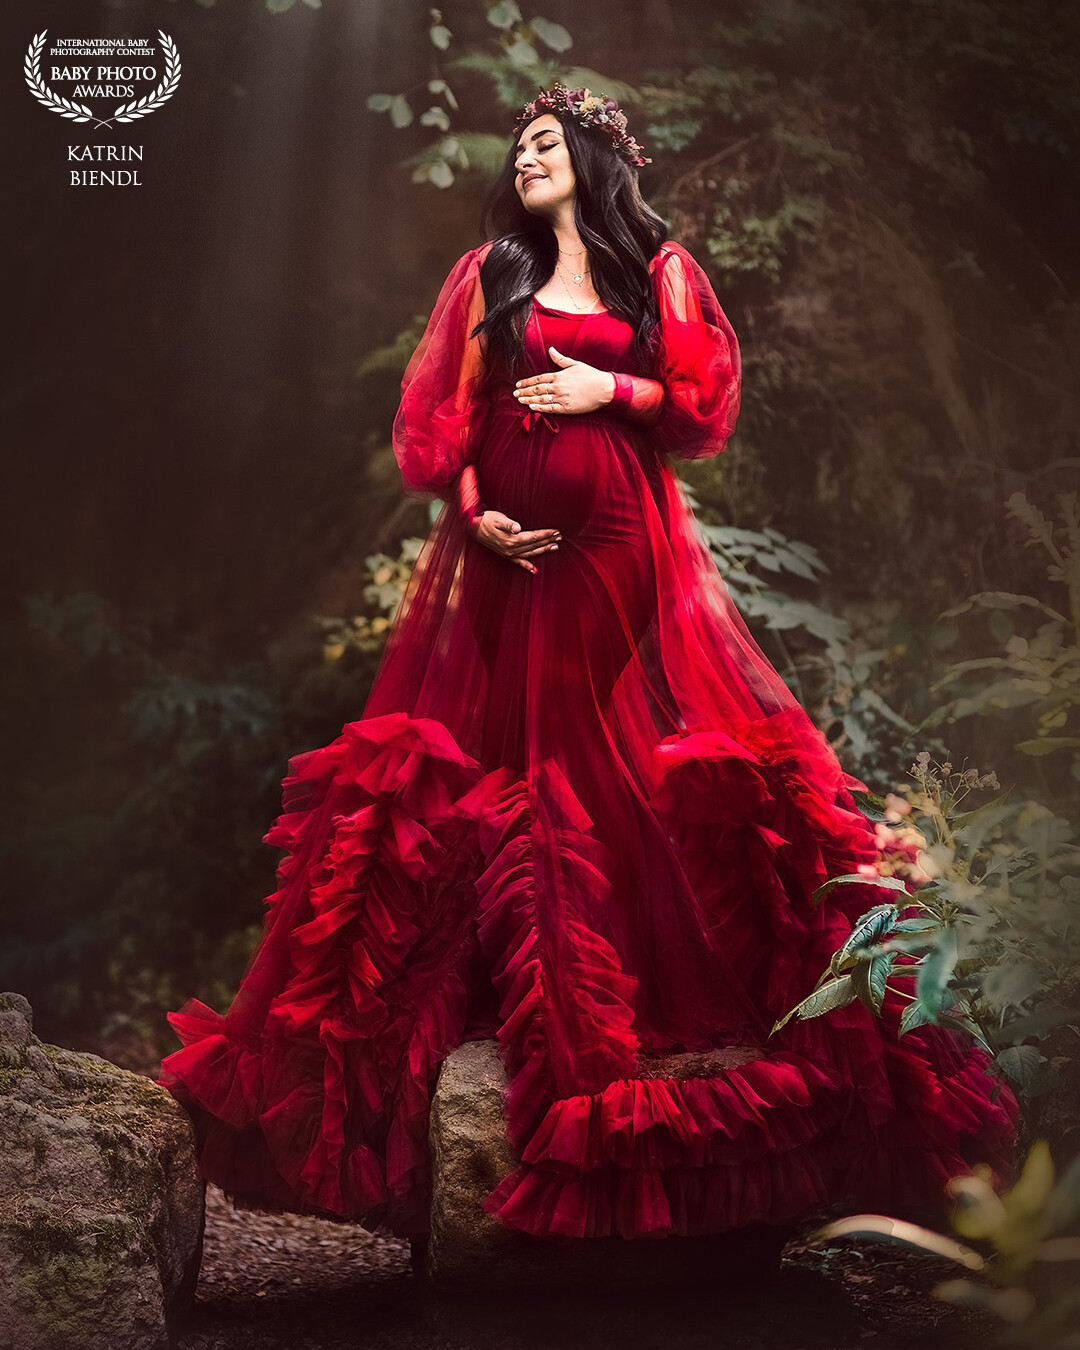 Pregnancy gives the expectant mother a special, wonderful bright aura. I love scenery of nature and I think it creates perfect frame for a maternity shooting.